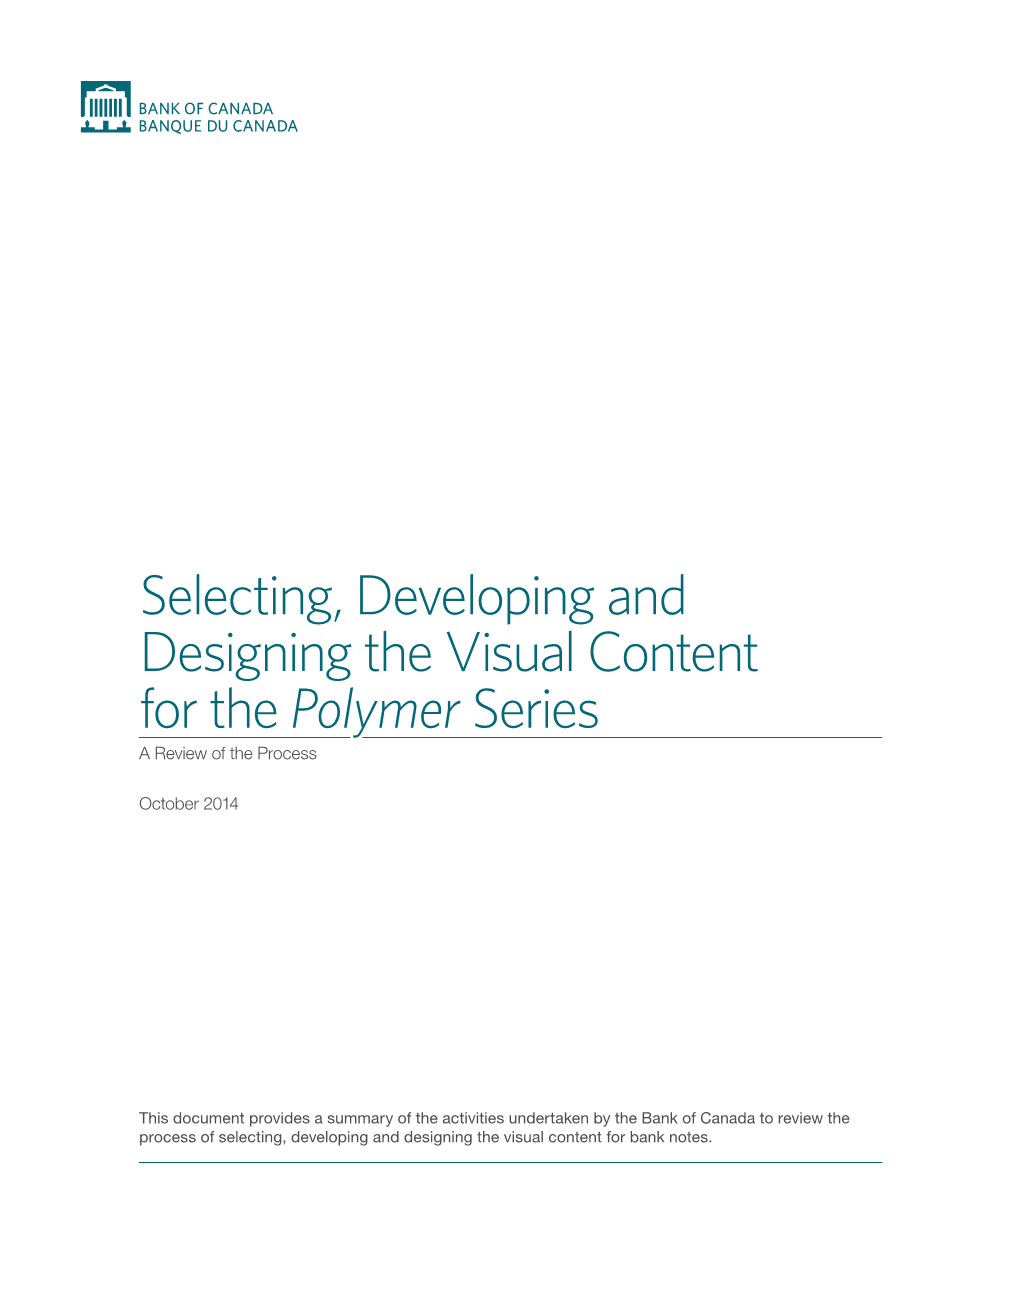 Selecting, Developing and Designing the Visual Content for the Polymer Series a Review of the Process